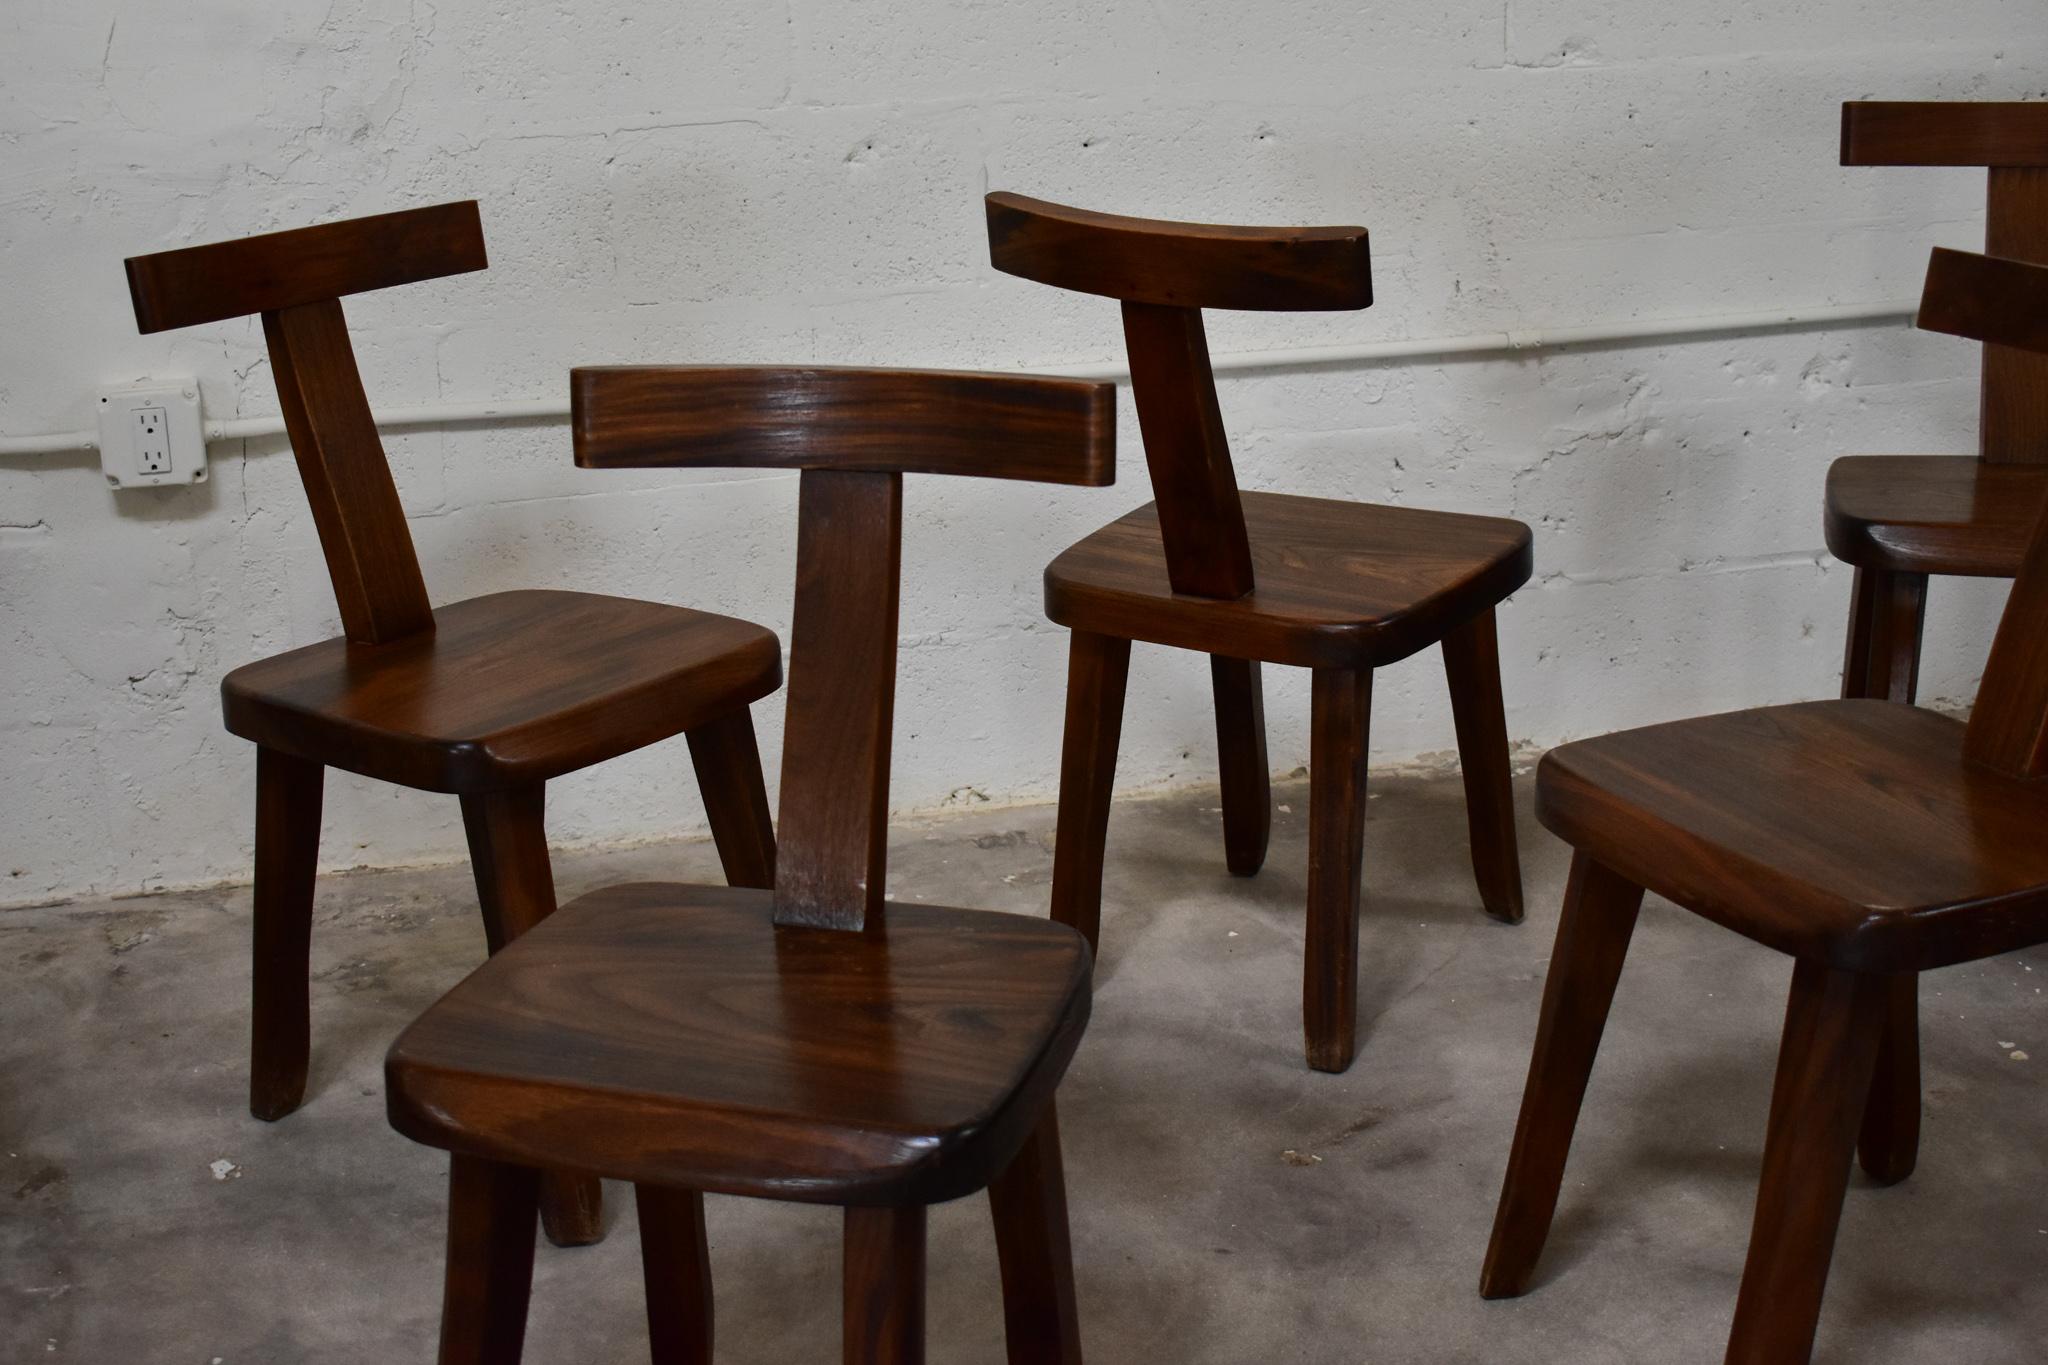 These brutalist dining chairs were designed by olavi hanninen . The freeform design of these elm chairs embodies the nature of brustalism and its appeal to the imperfect handmade item . Although brutalism is known to be harsh , the texture and